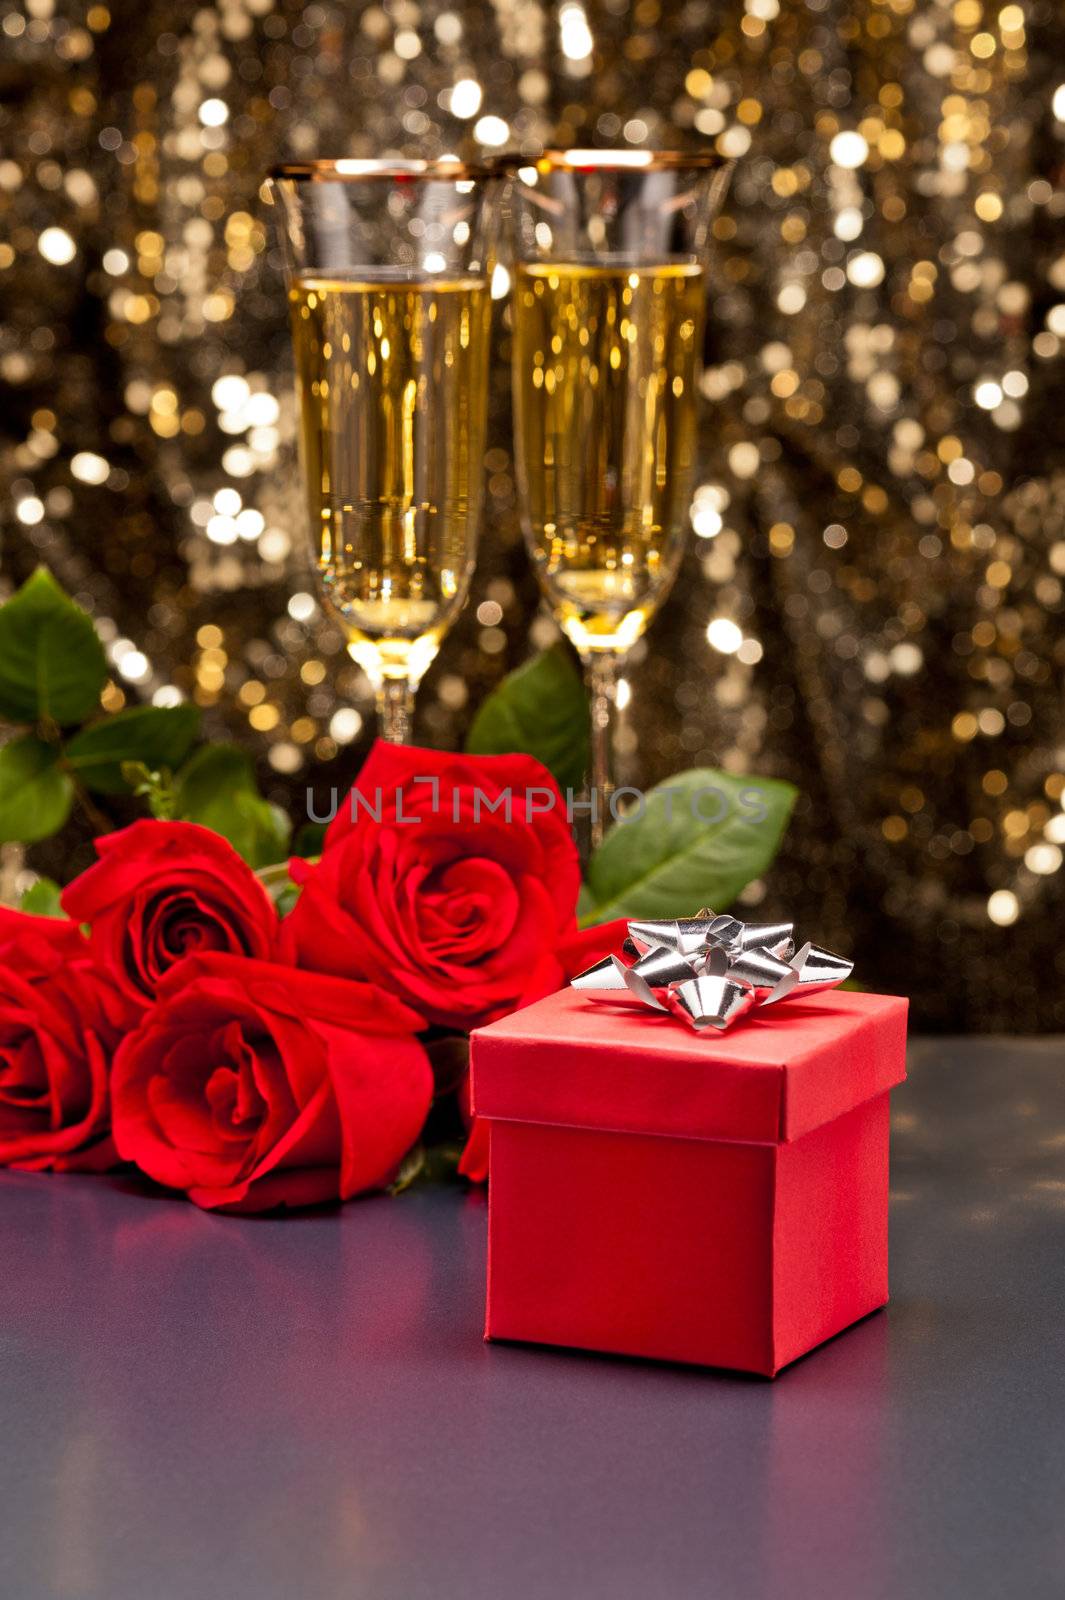 Red present box Champagne and roses in front of a gold glitter background